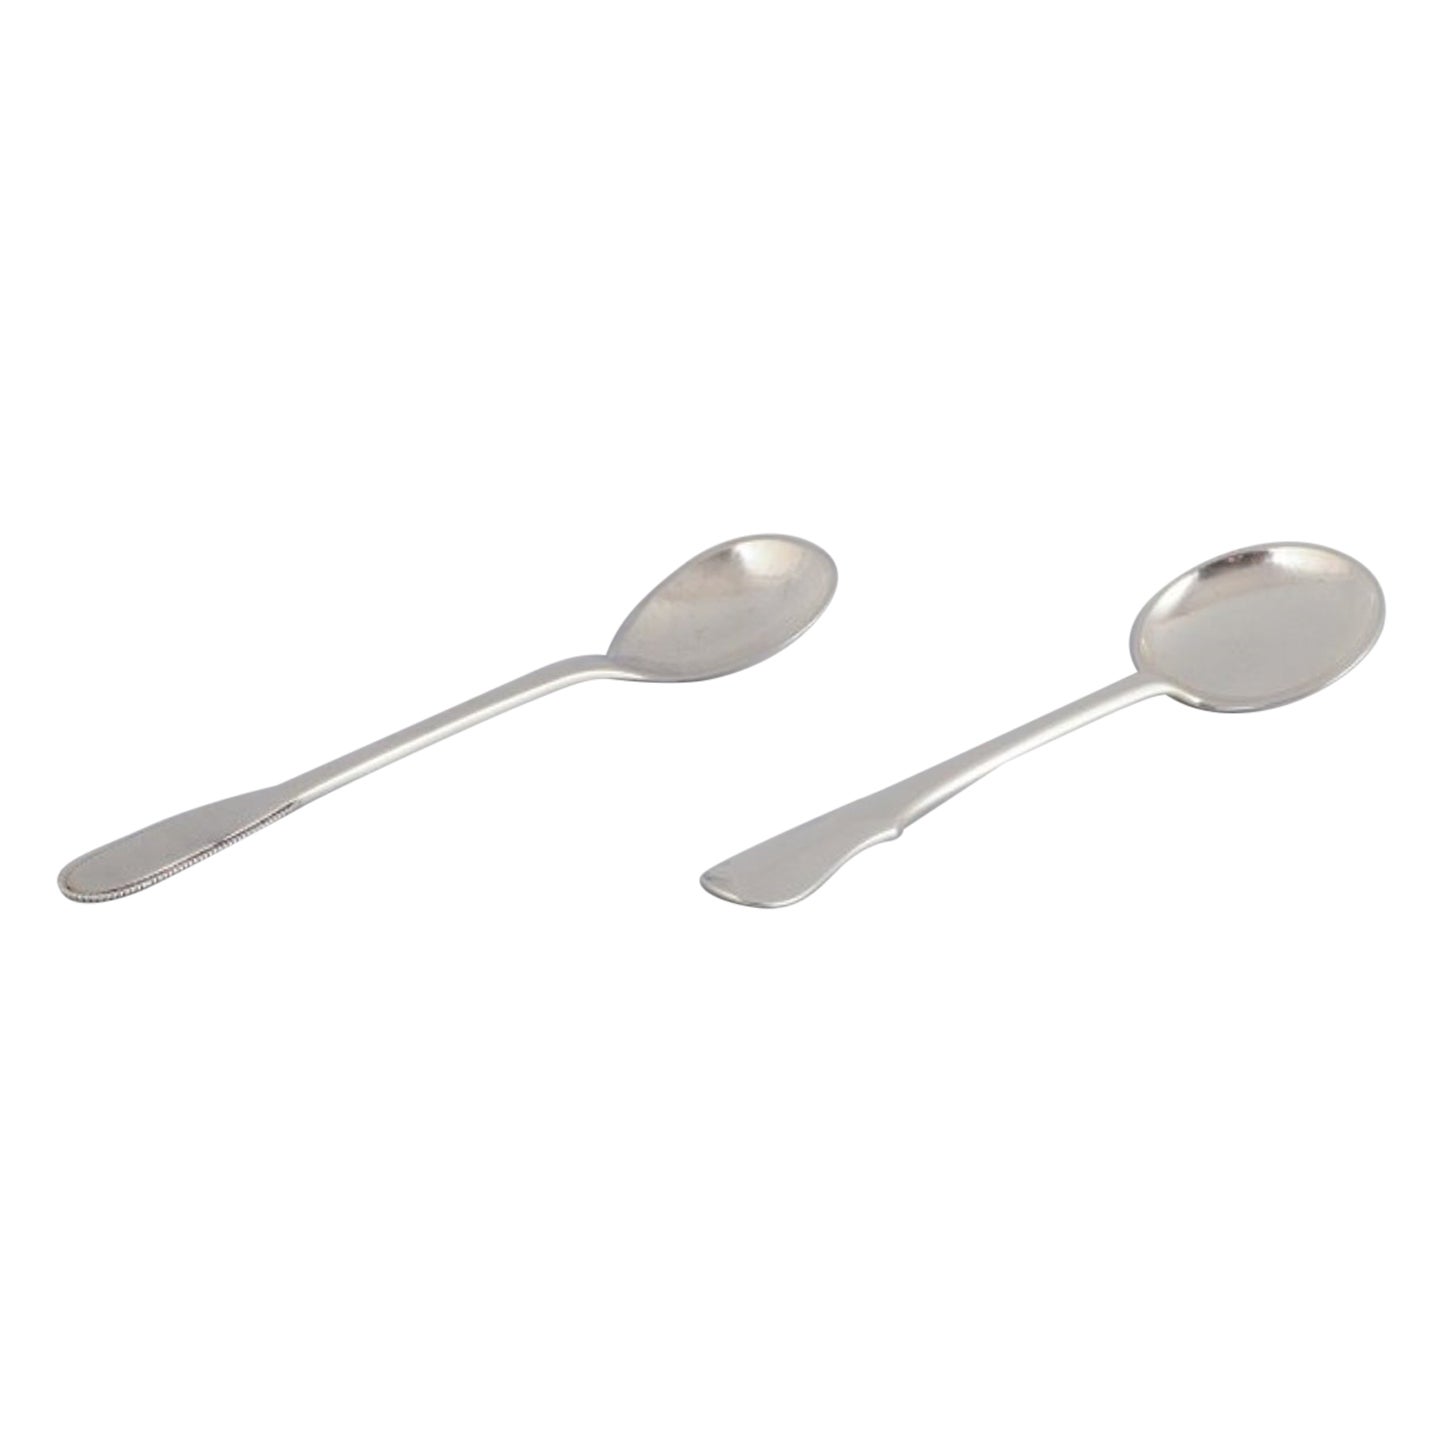 Evald Nielsen, Danish Silversmith, Two Hammered Sugar Spoons in 830 Silver For Sale